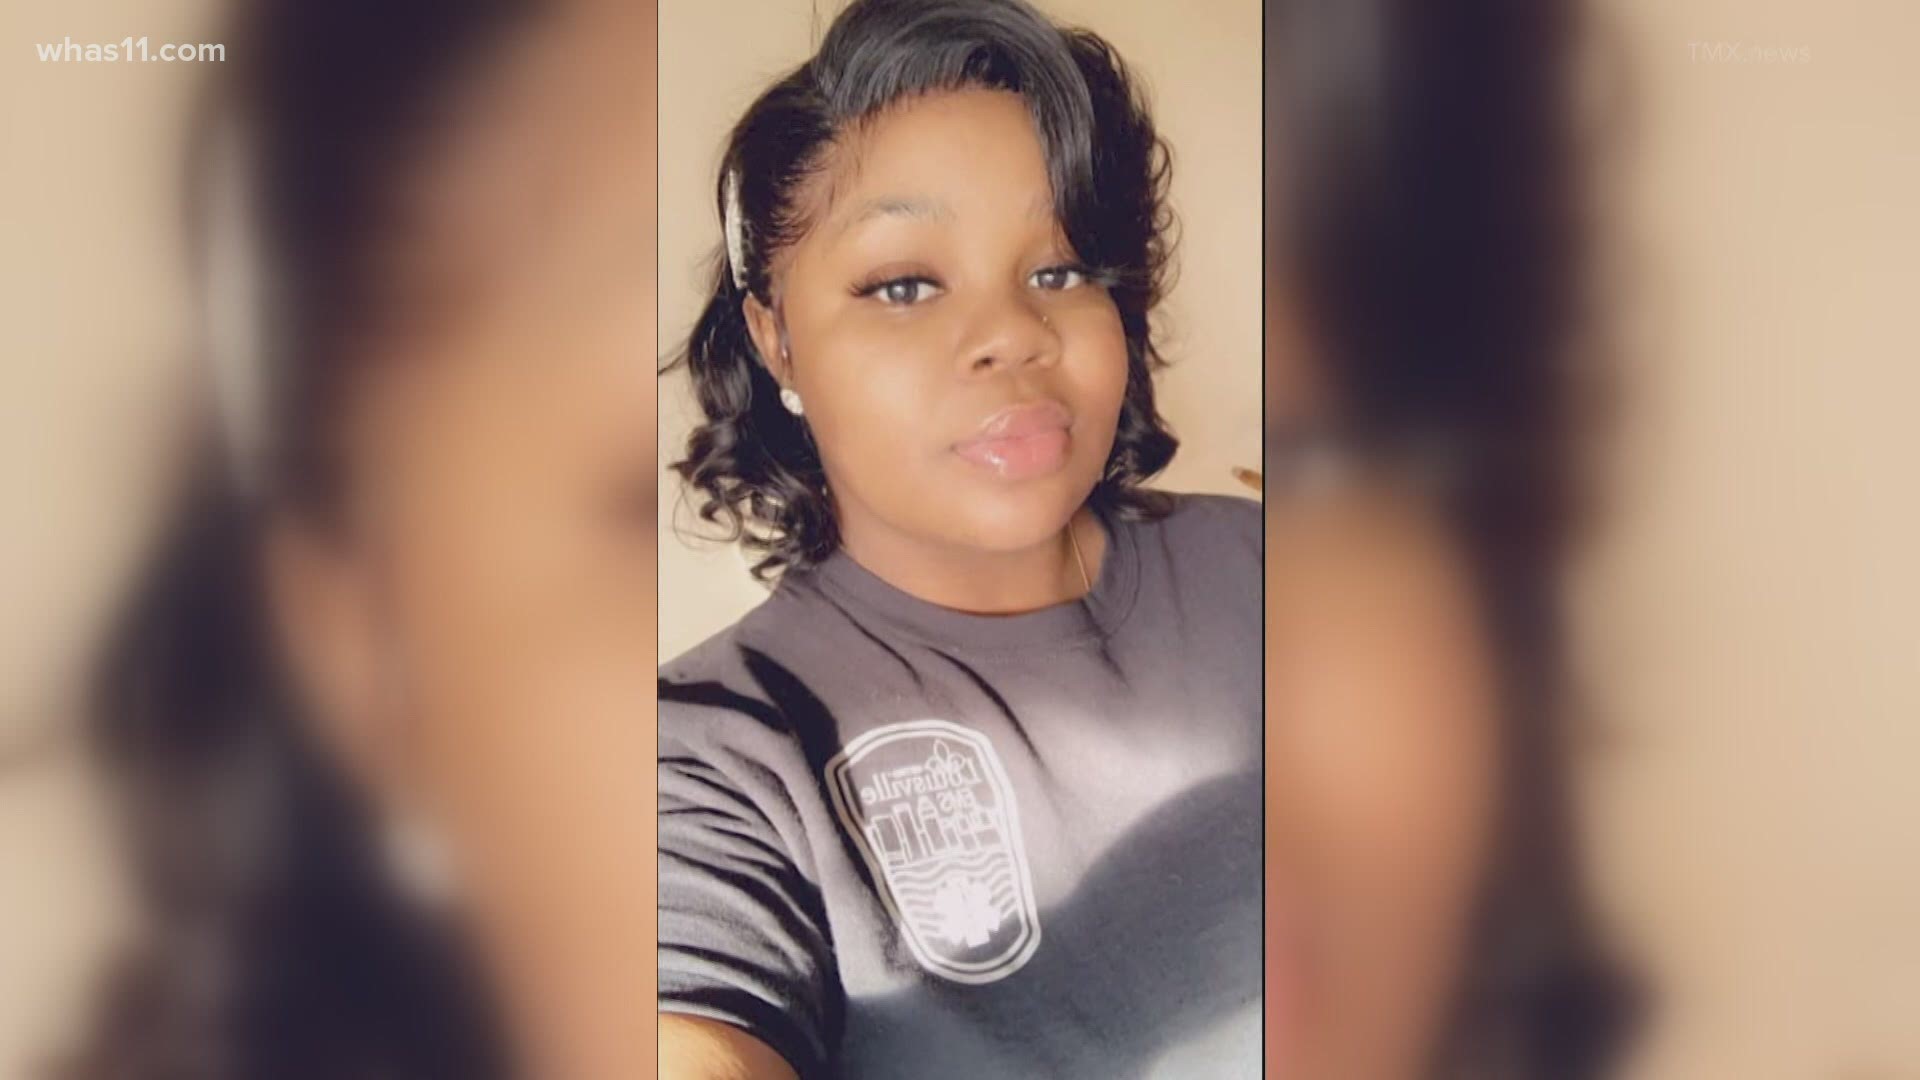 Some community leaders and attorneys representing Breonna Taylor's family have been weighing in on the audio recordings of the grand jury's proceedings.